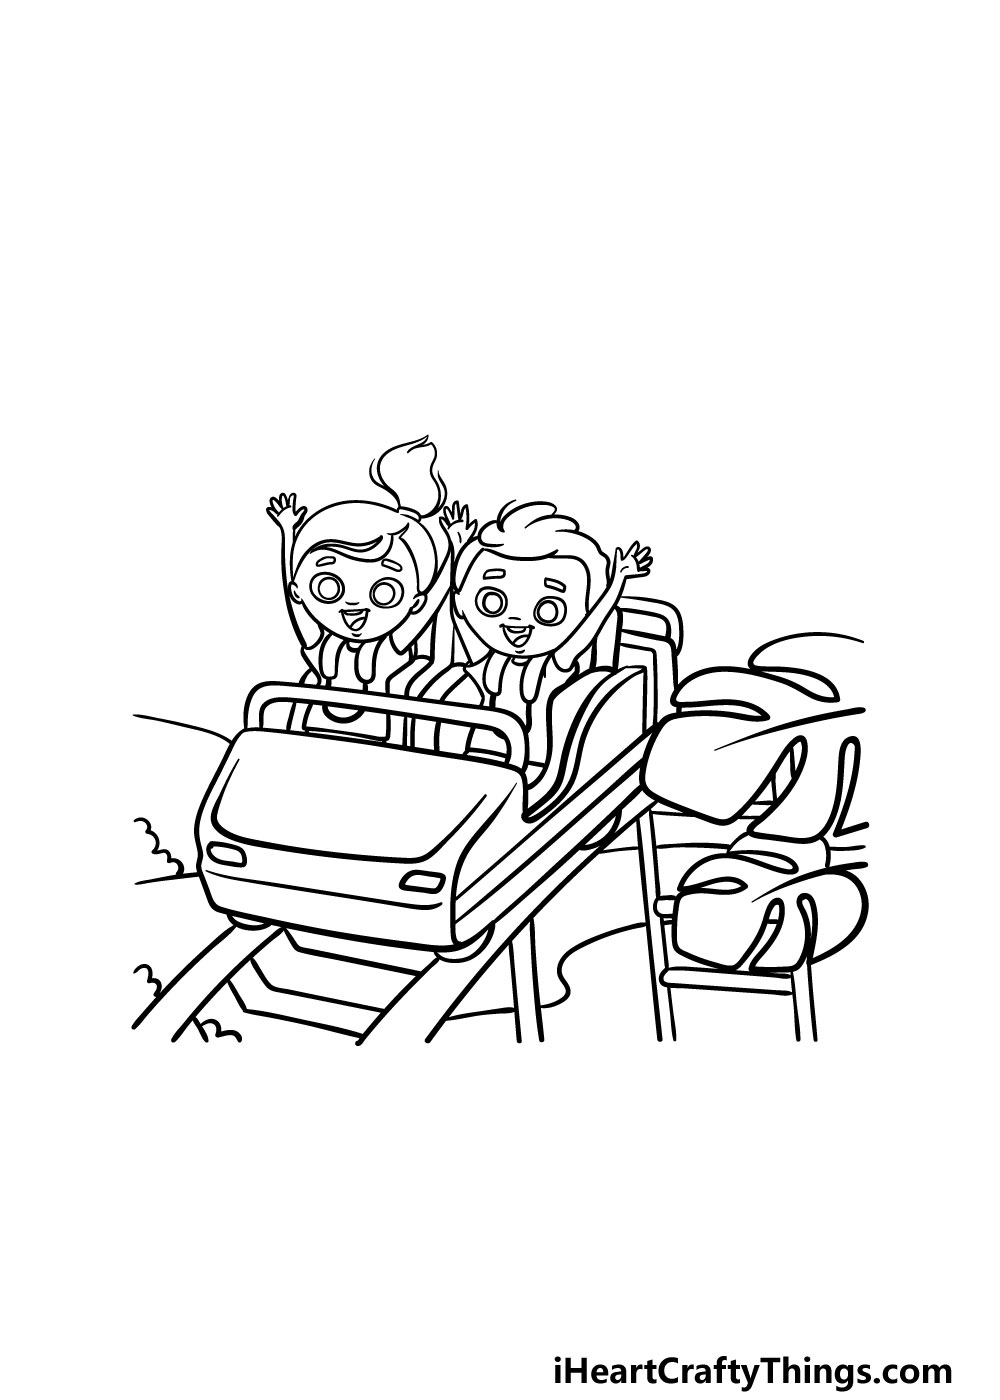 drawing a roller coaster step 4